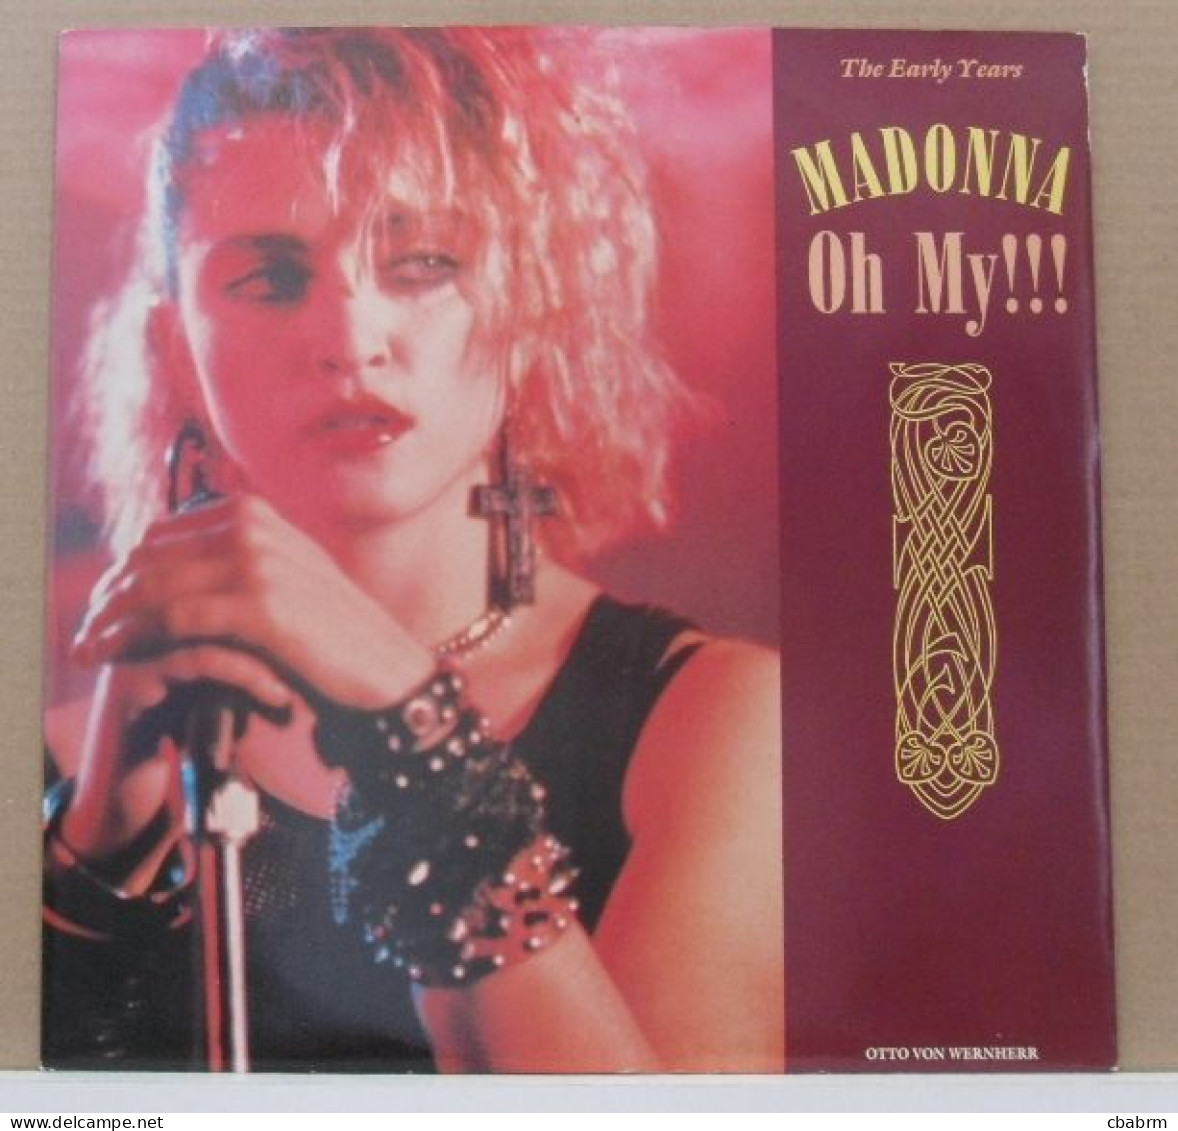 MAXI 45 TOURS MADONNA OH MY !!! - MADE IN UK REPLAY 3009 - 45 Rpm - Maxi-Single